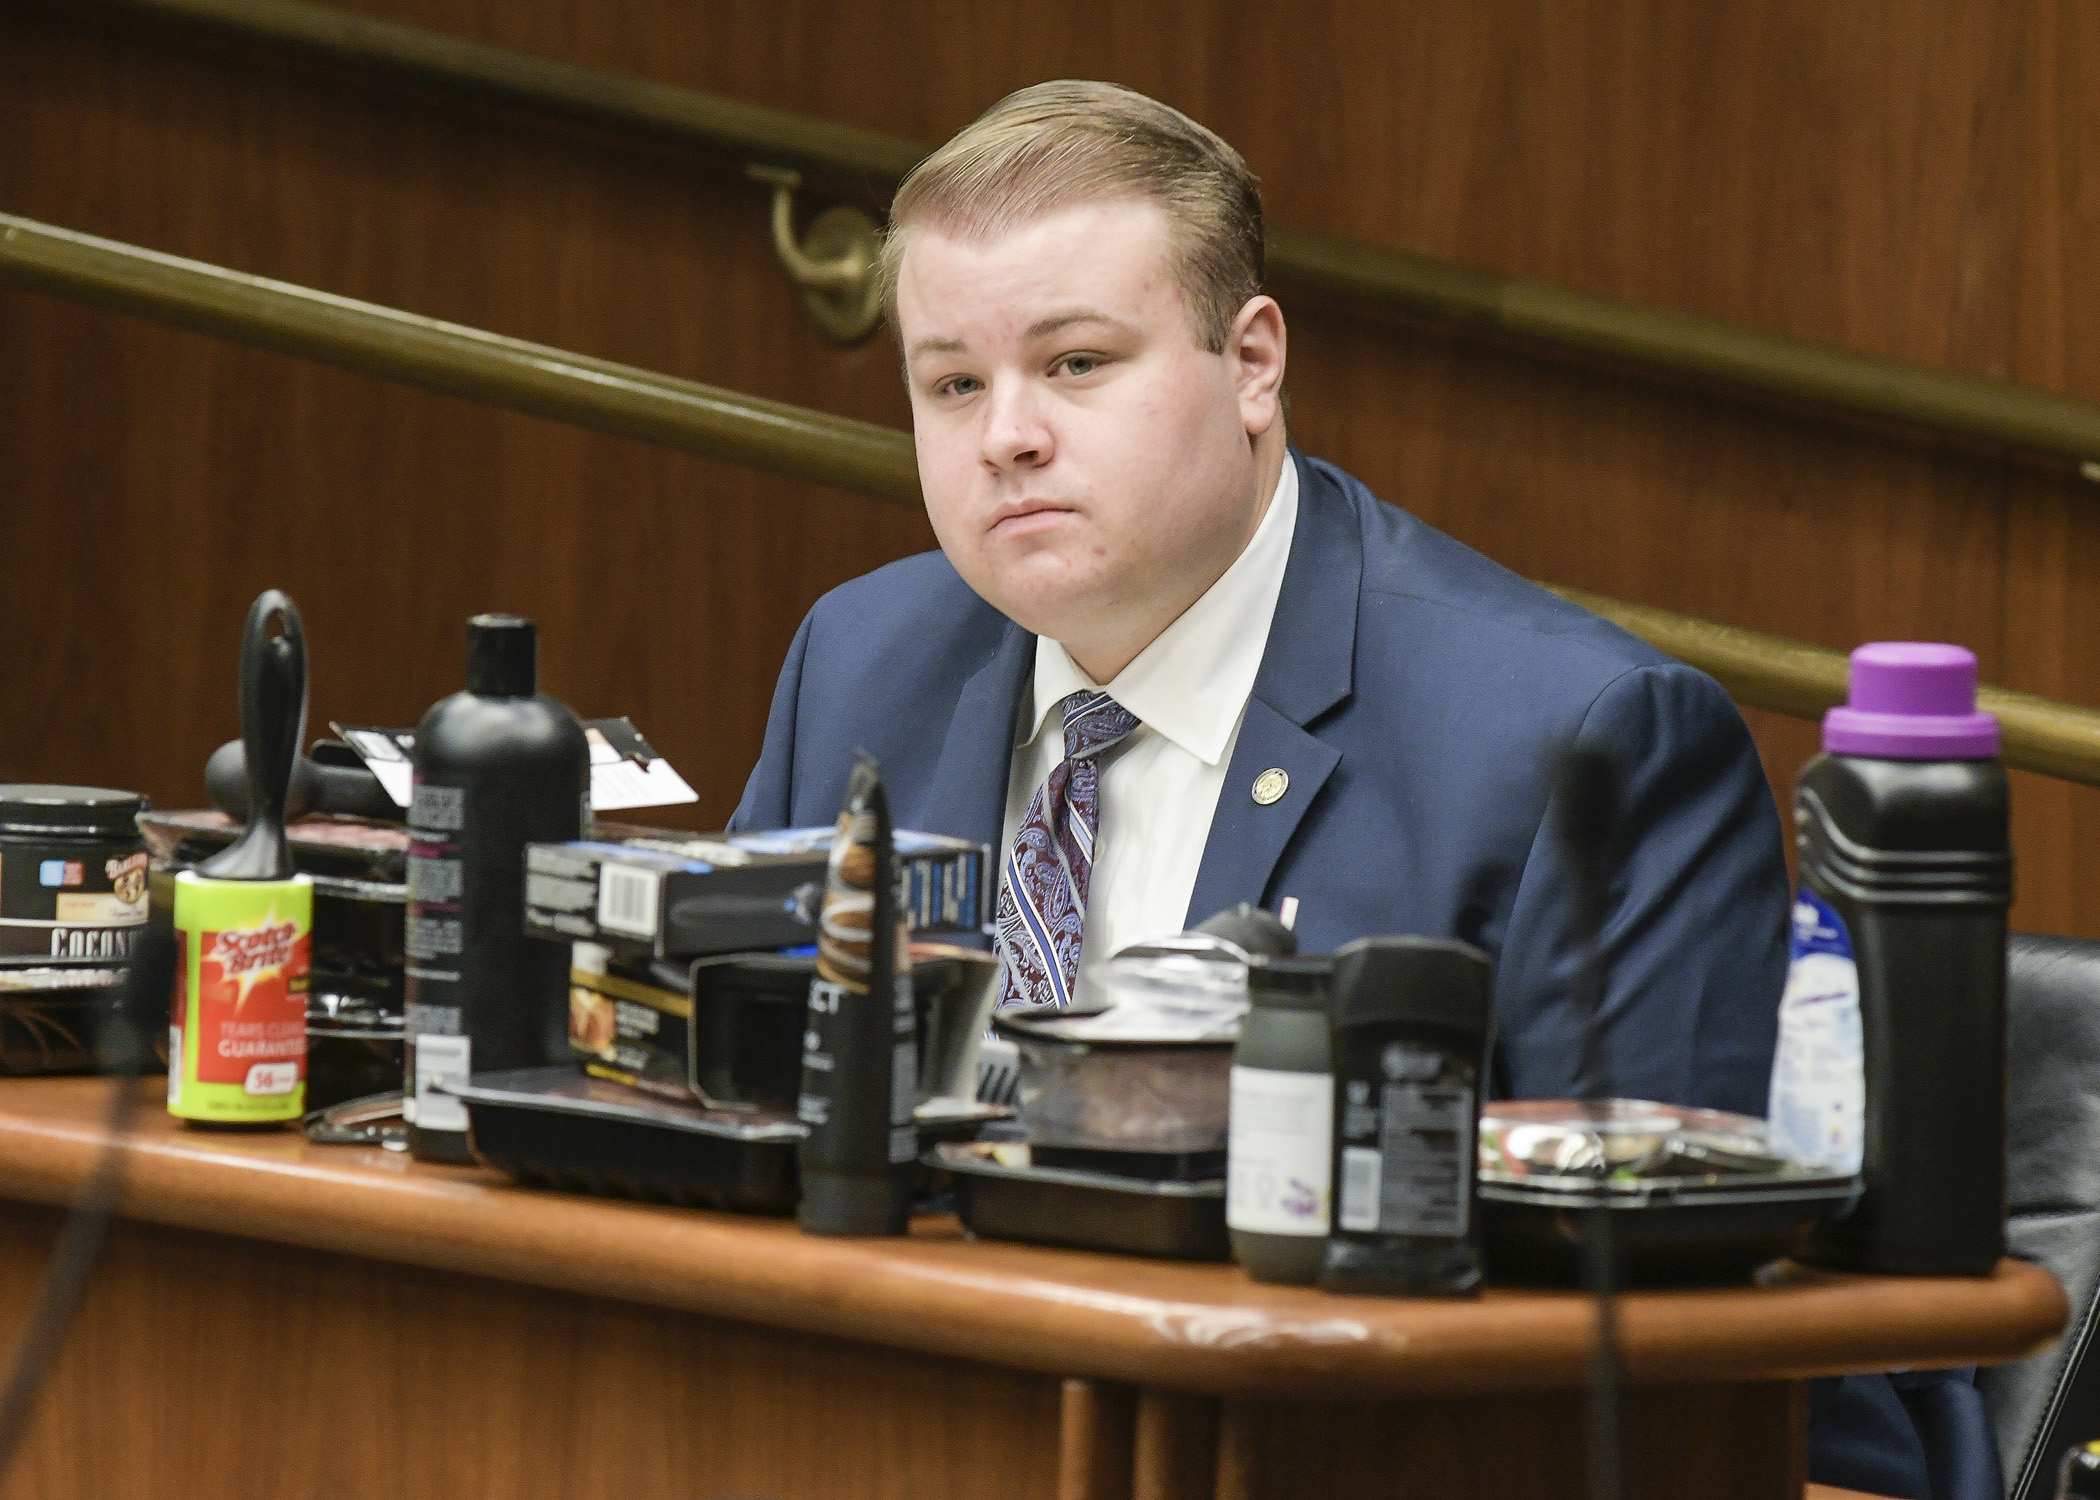 Surrounded by recyclable black plastic products banned by some cities, Rep. Drew Christensen testifies March 28 on a bill he sponsors that would prohibit counties, cities and towns from regulating auxiliary containers. Photo by Andrew VonBank